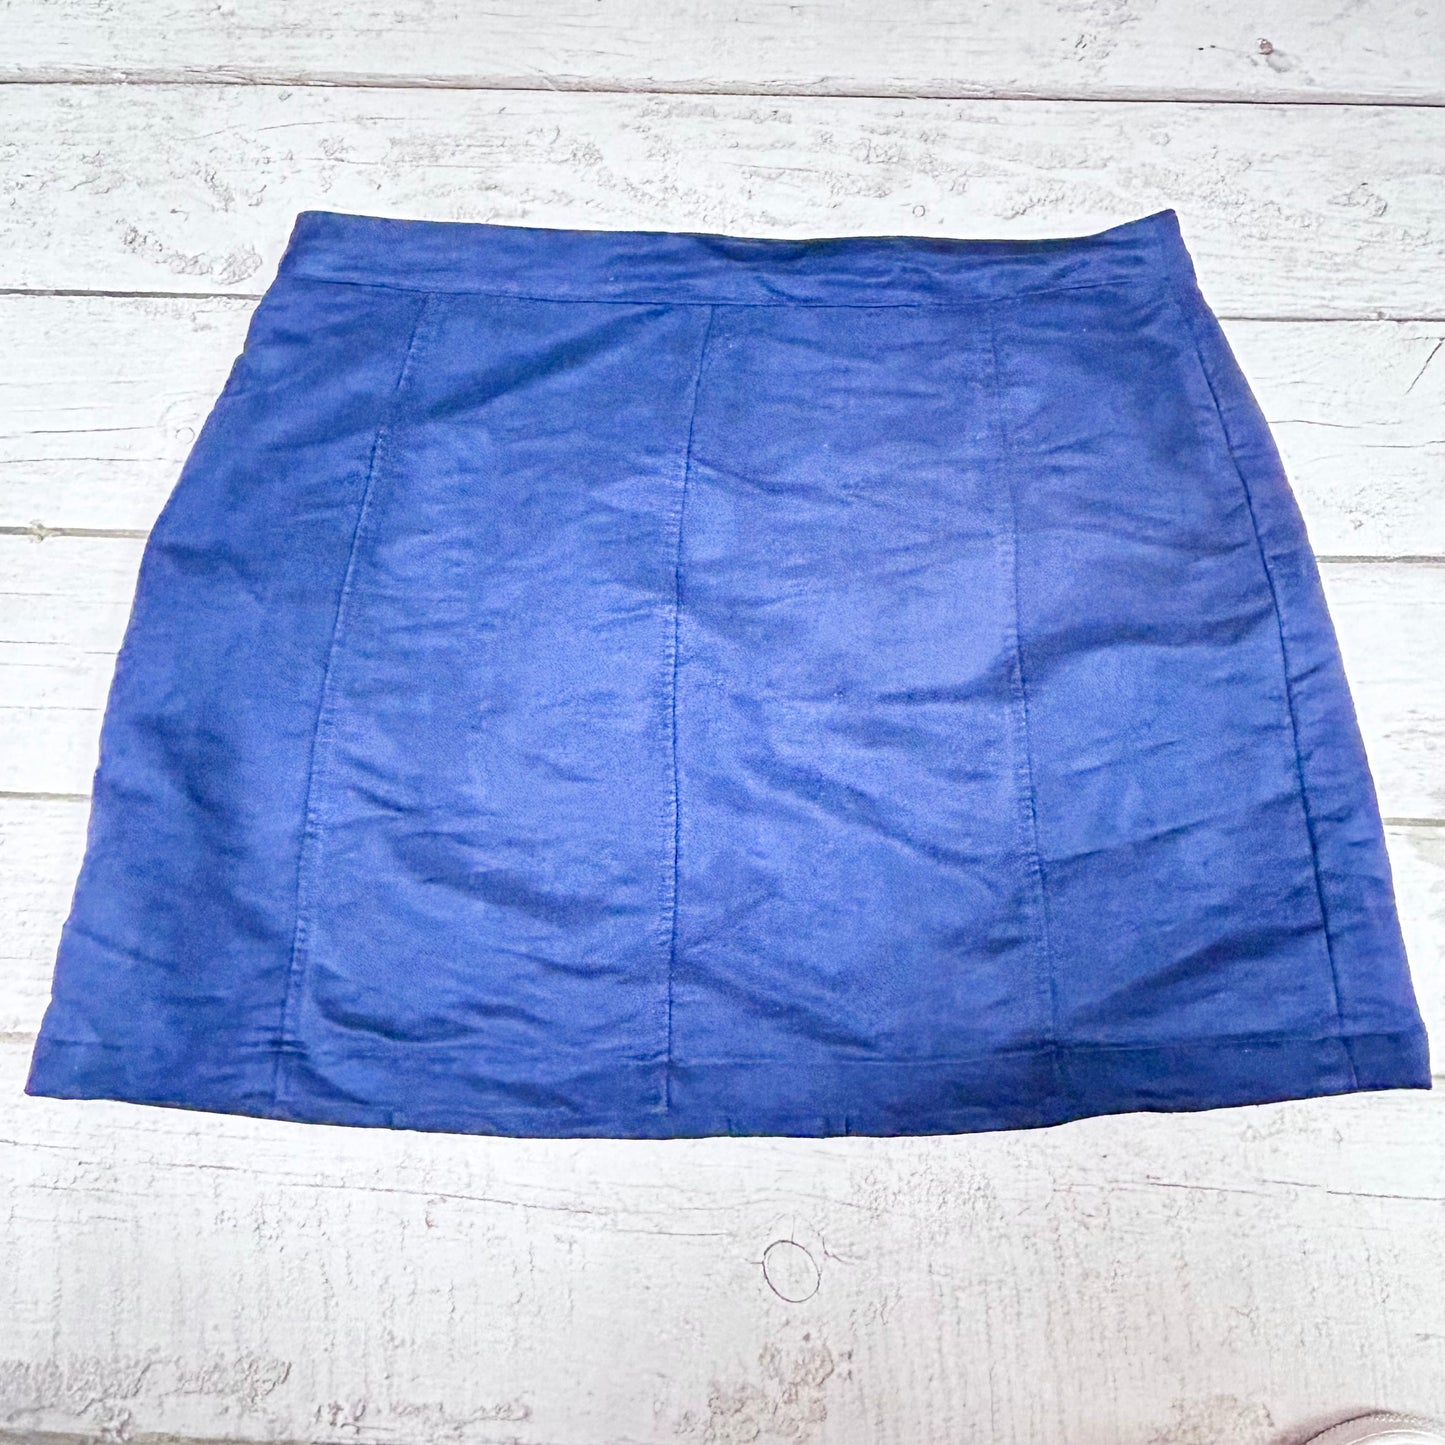 Skirt Mini & Short By Old Navy  Size: 14